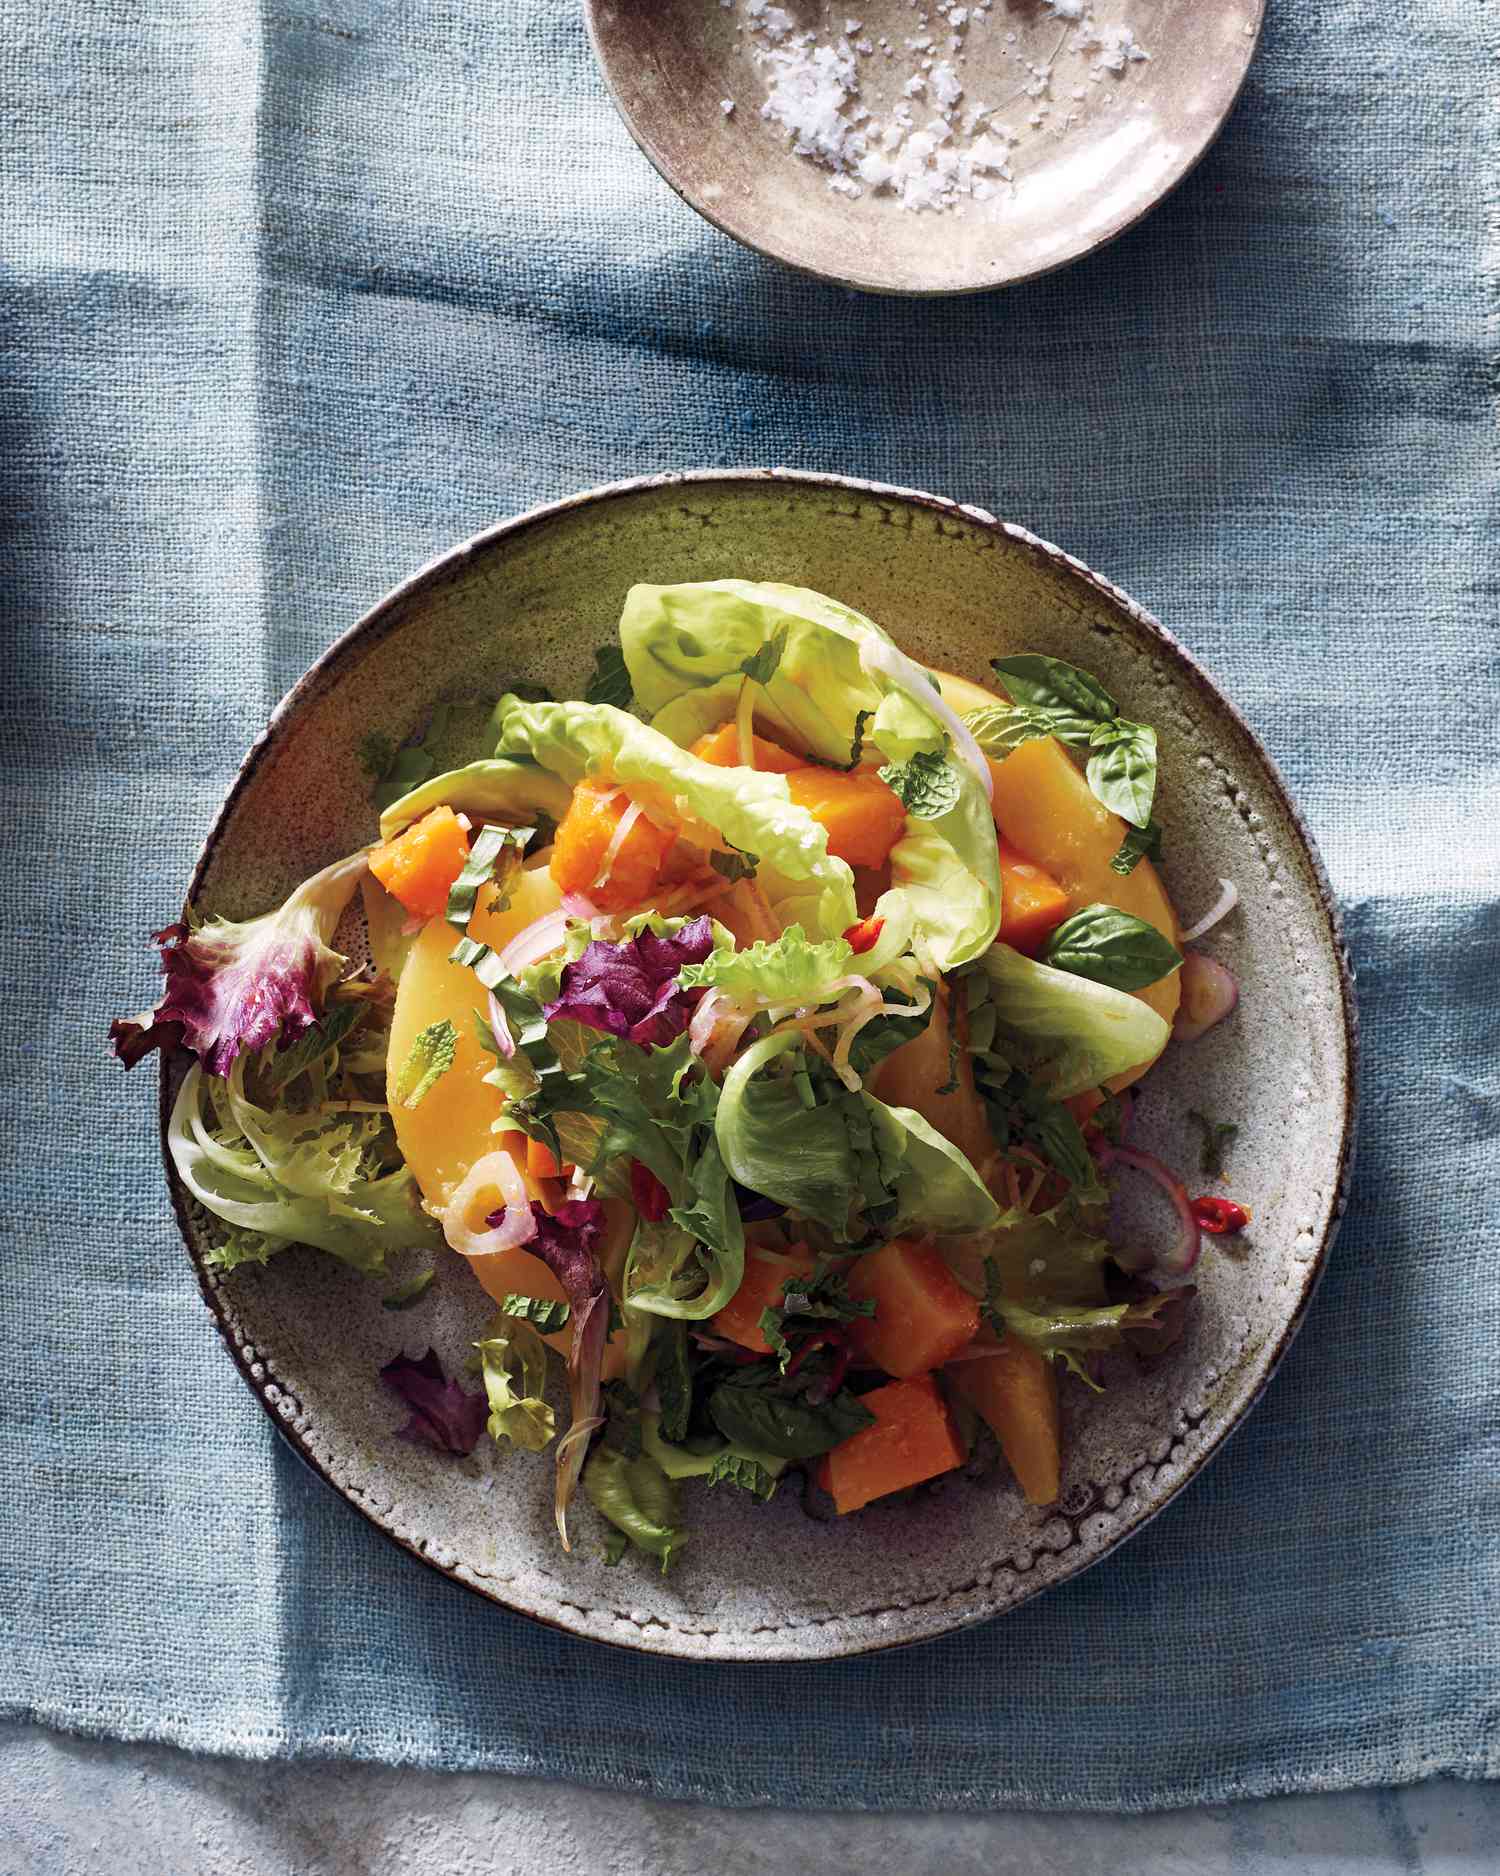 Spicy Squash Salad with Ginger-Lime Dressing